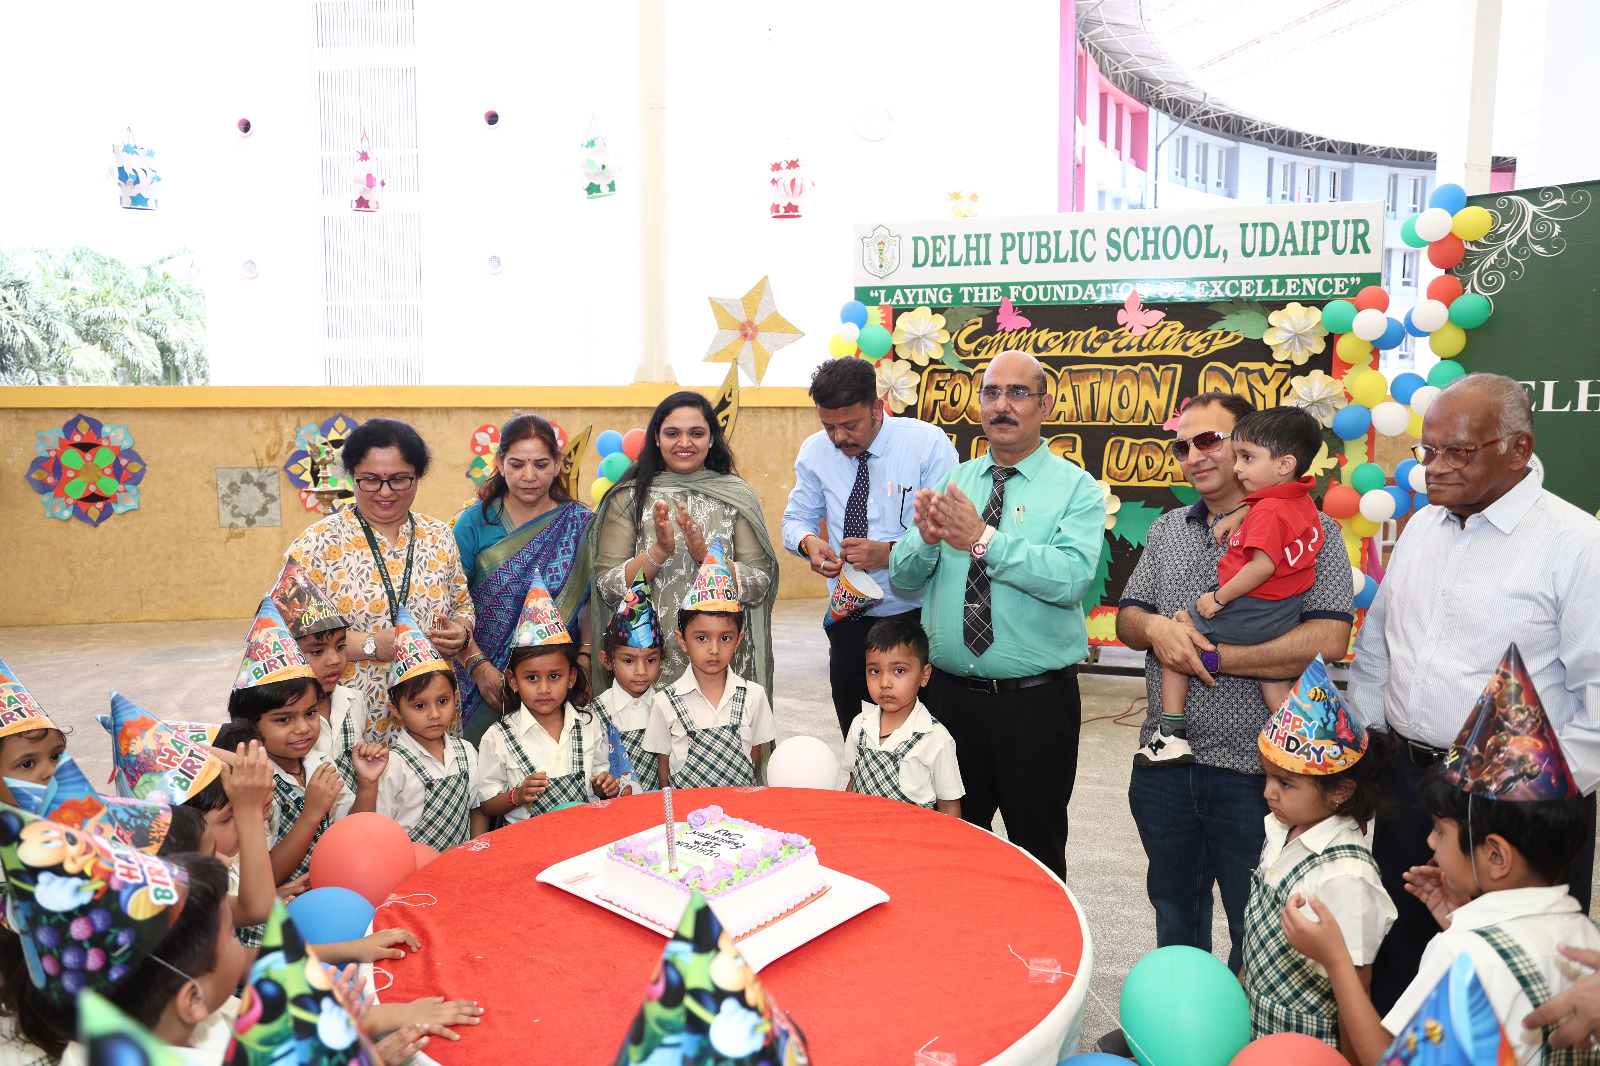 DPS Udaipur Celebrates 18th Foundation Day with Enthusiasm